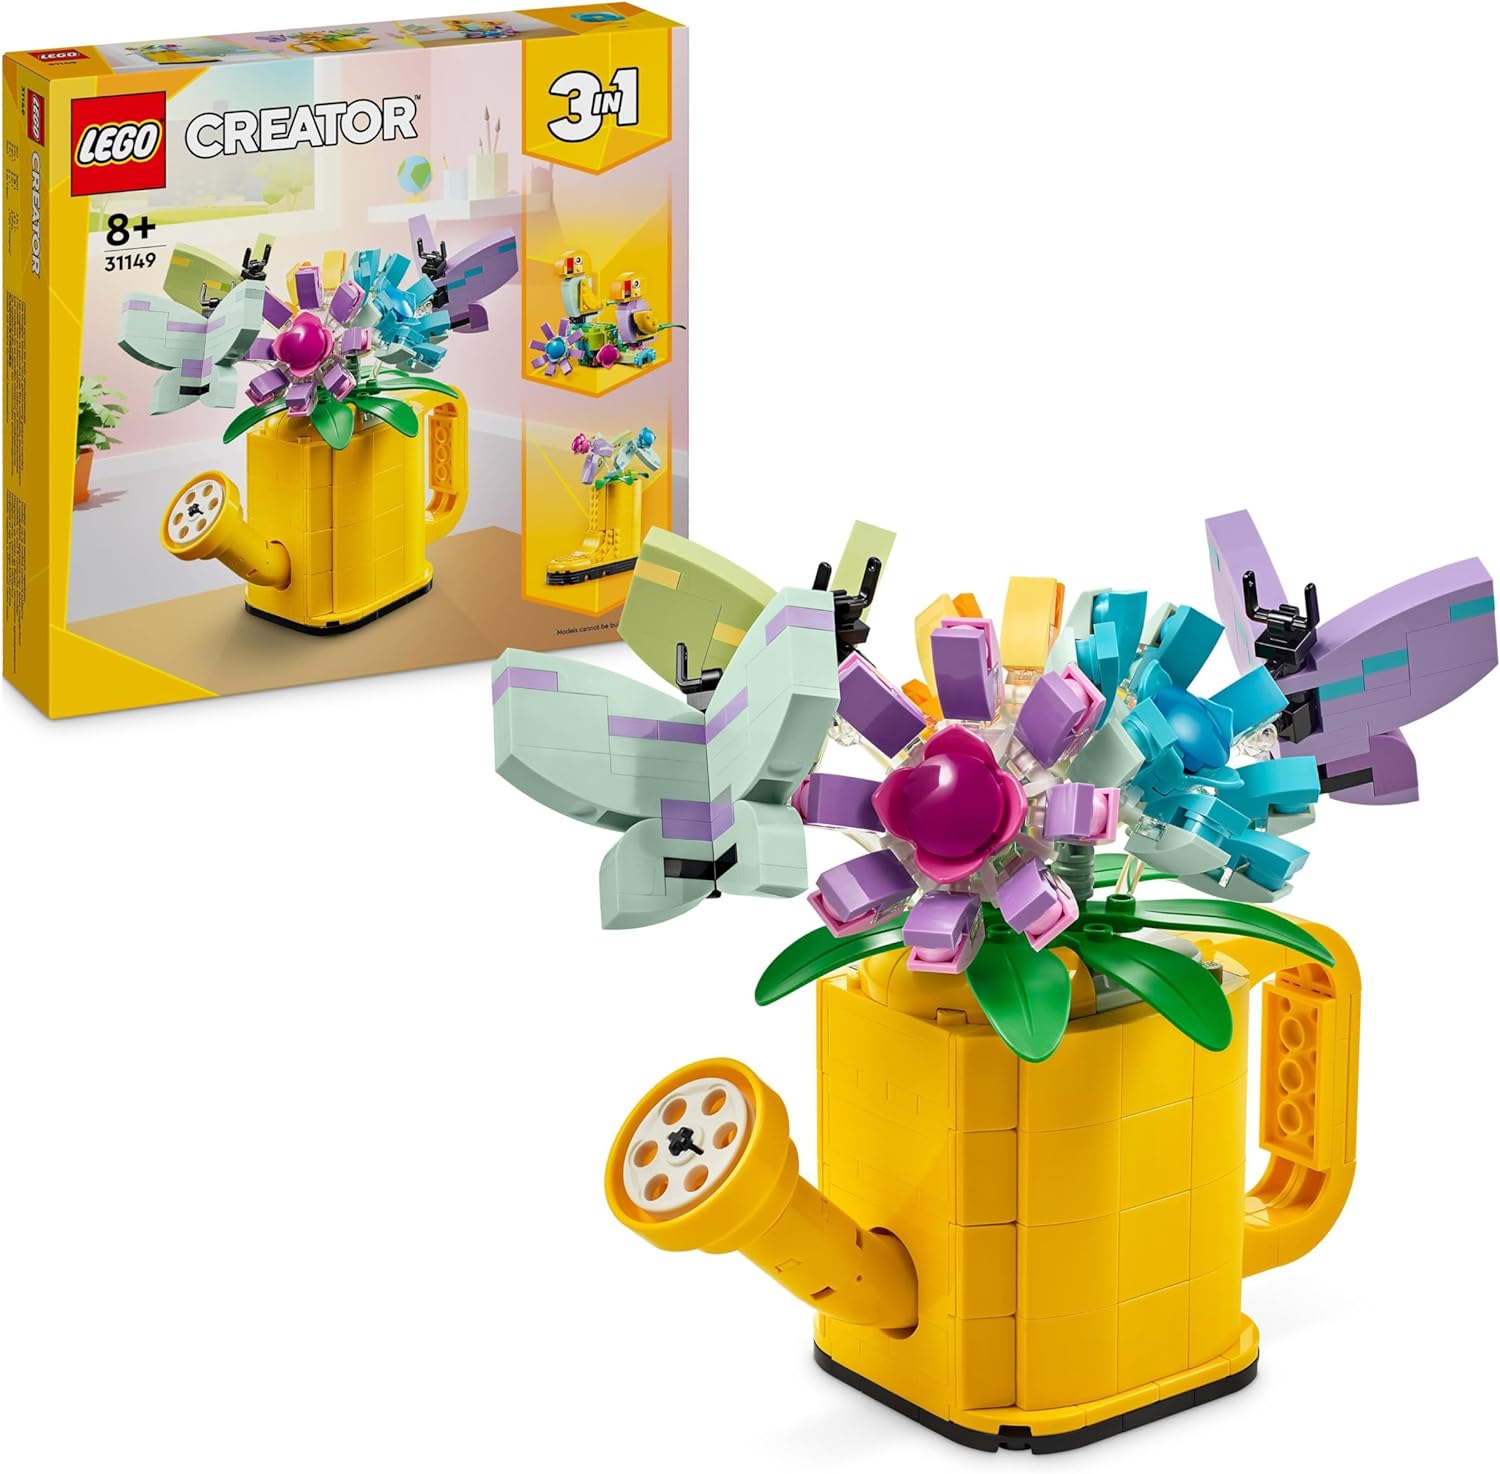 LEGO Creator 3-in-1 Watering Can with Flowers Set, Children\'s Room Decoration, Build a Watering Can with Bouquet, Wellington Boots or 2 Toy Birds, Creative Gift for Girls and Boys from 8 Years 31149